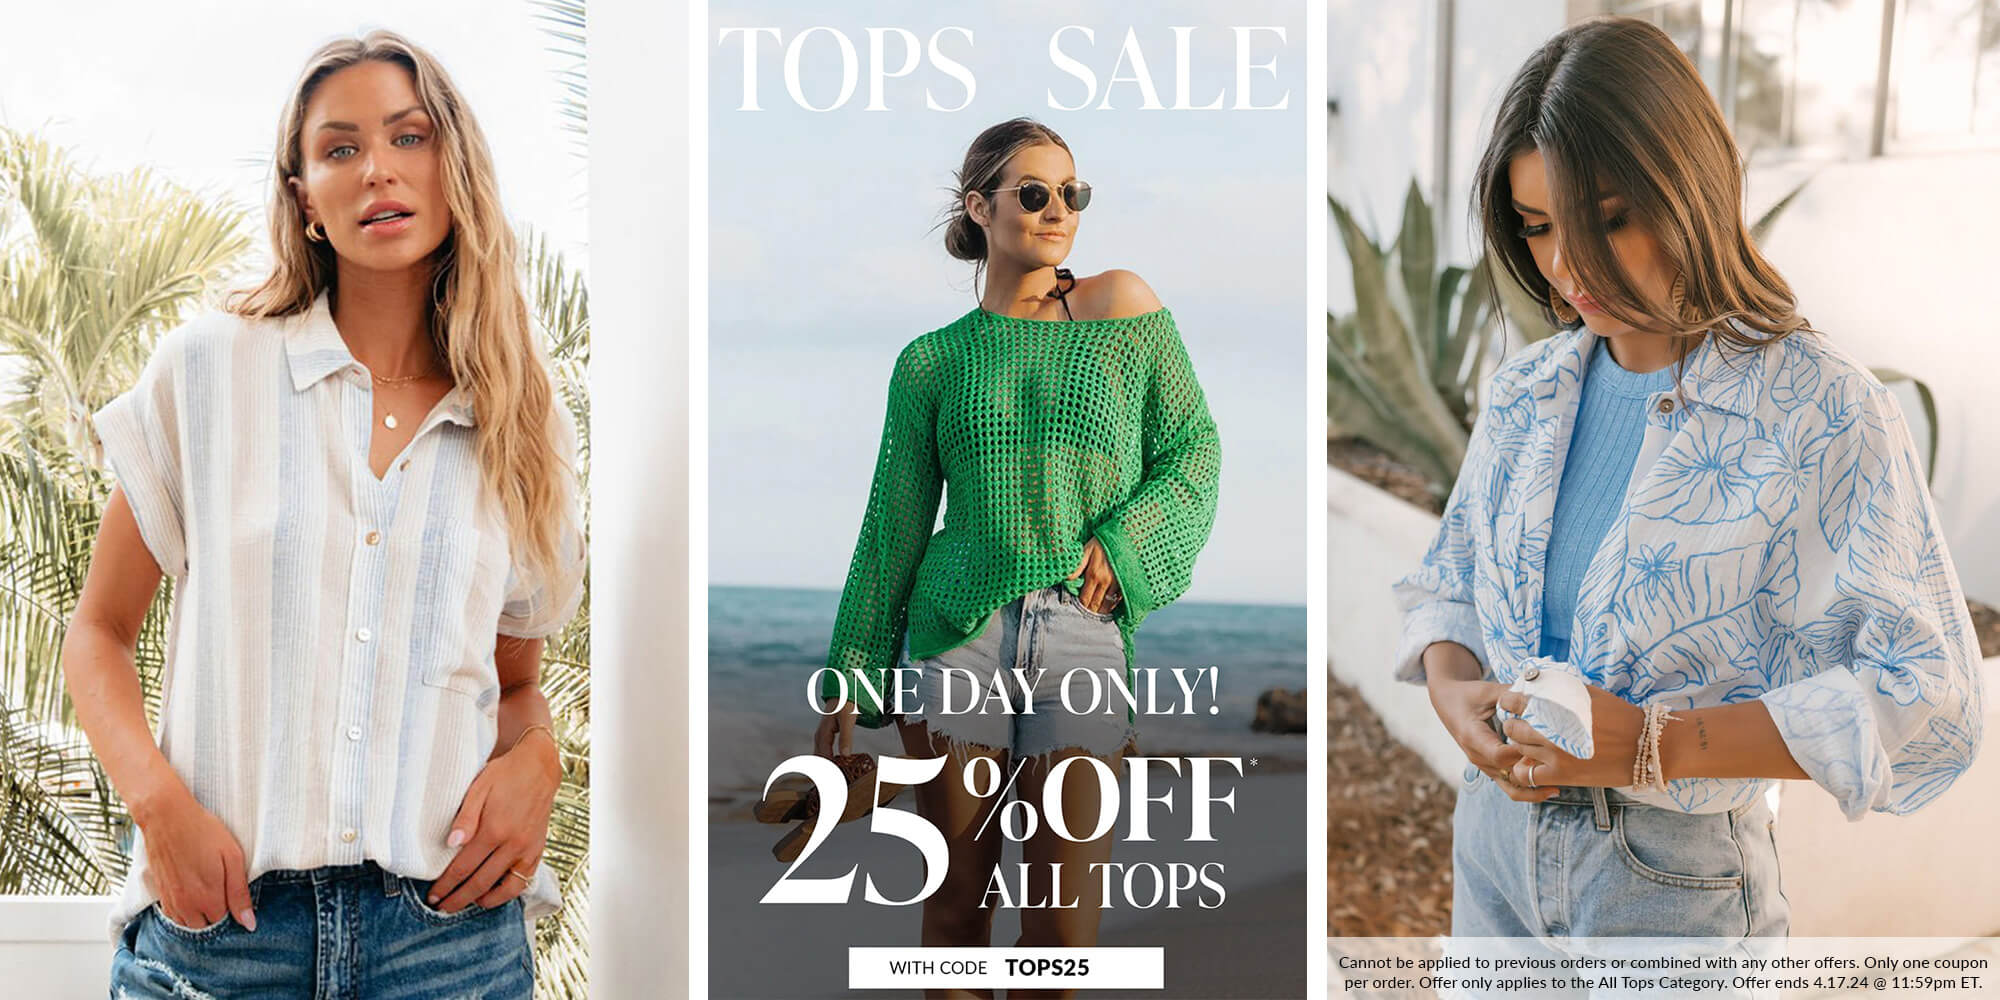 tops sale one day only! 25% off all tops with code TOPS25 Cannot be applied to previous orders or combined with any other offers. Only one coupon per order. Offer only applies to the All Tops Category. Offer ends 4.17.24 @ 11:59pm ET